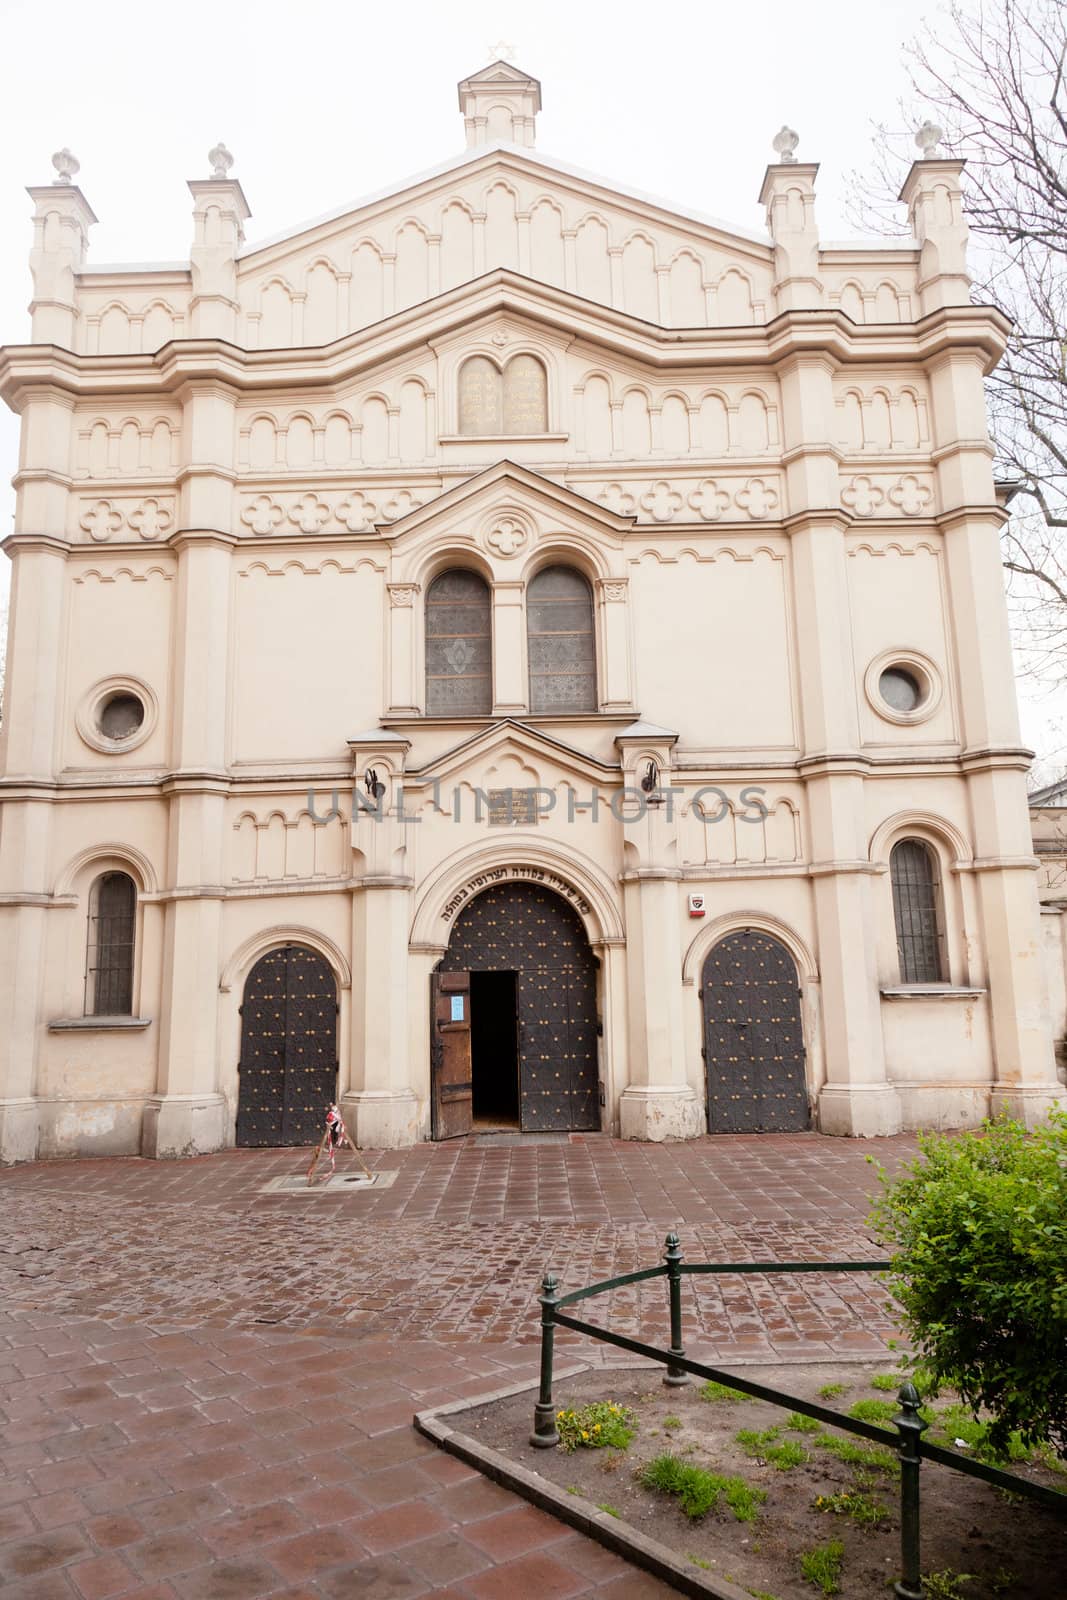 Tempel Synagogue is a Reform Jewish synagogue in Kraków, Poland, in the Kazimierz district.